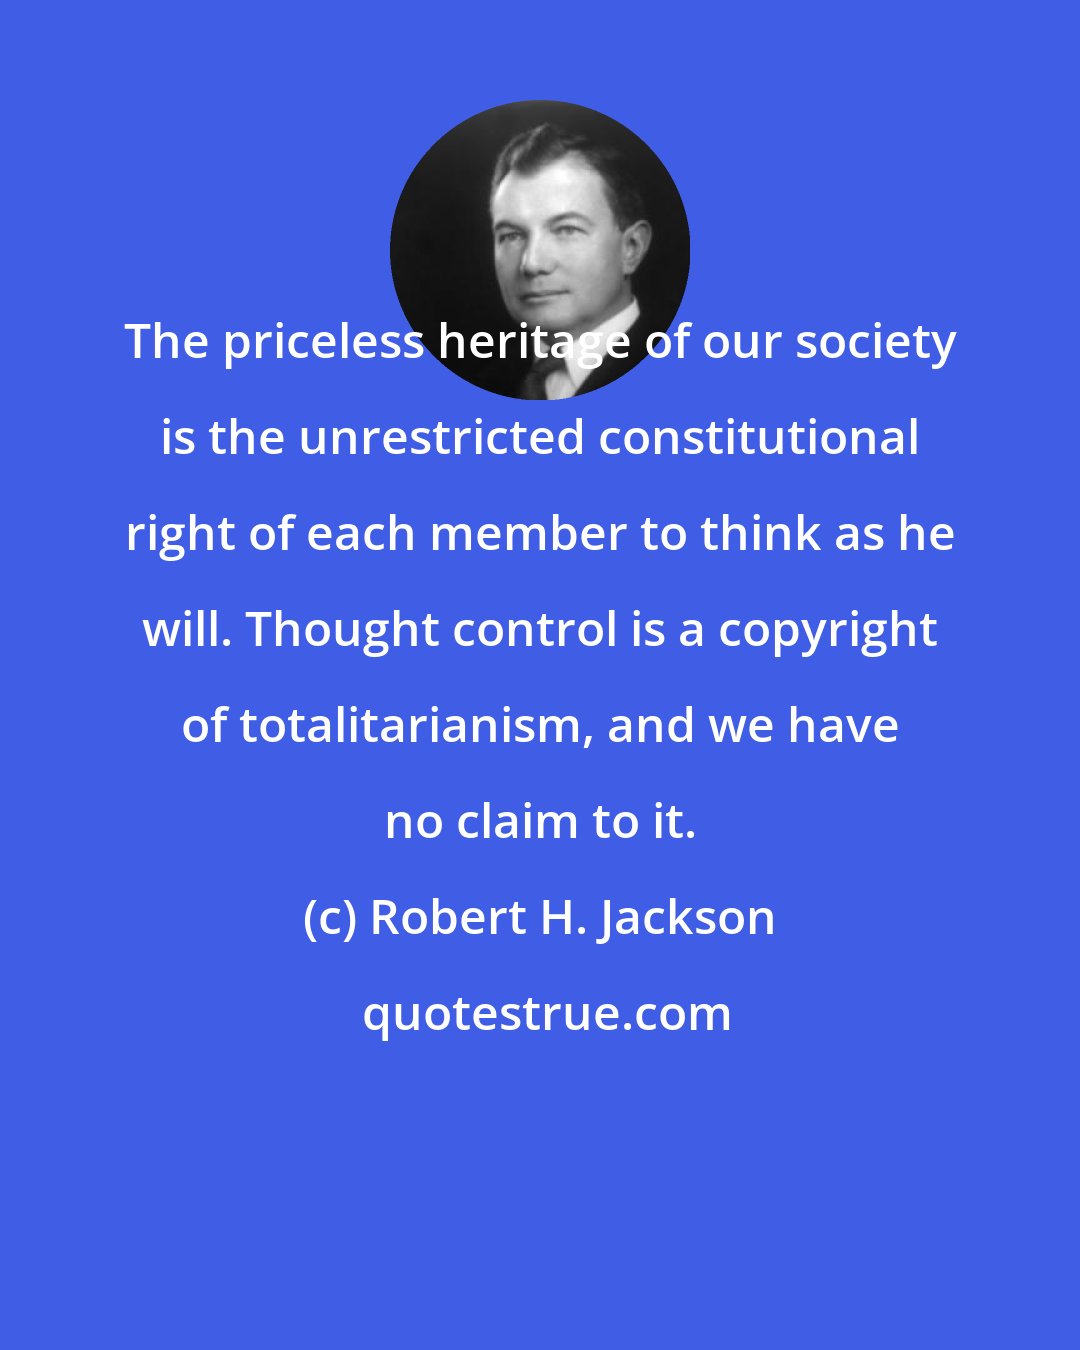 Robert H. Jackson: The priceless heritage of our society is the unrestricted constitutional right of each member to think as he will. Thought control is a copyright of totalitarianism, and we have no claim to it.